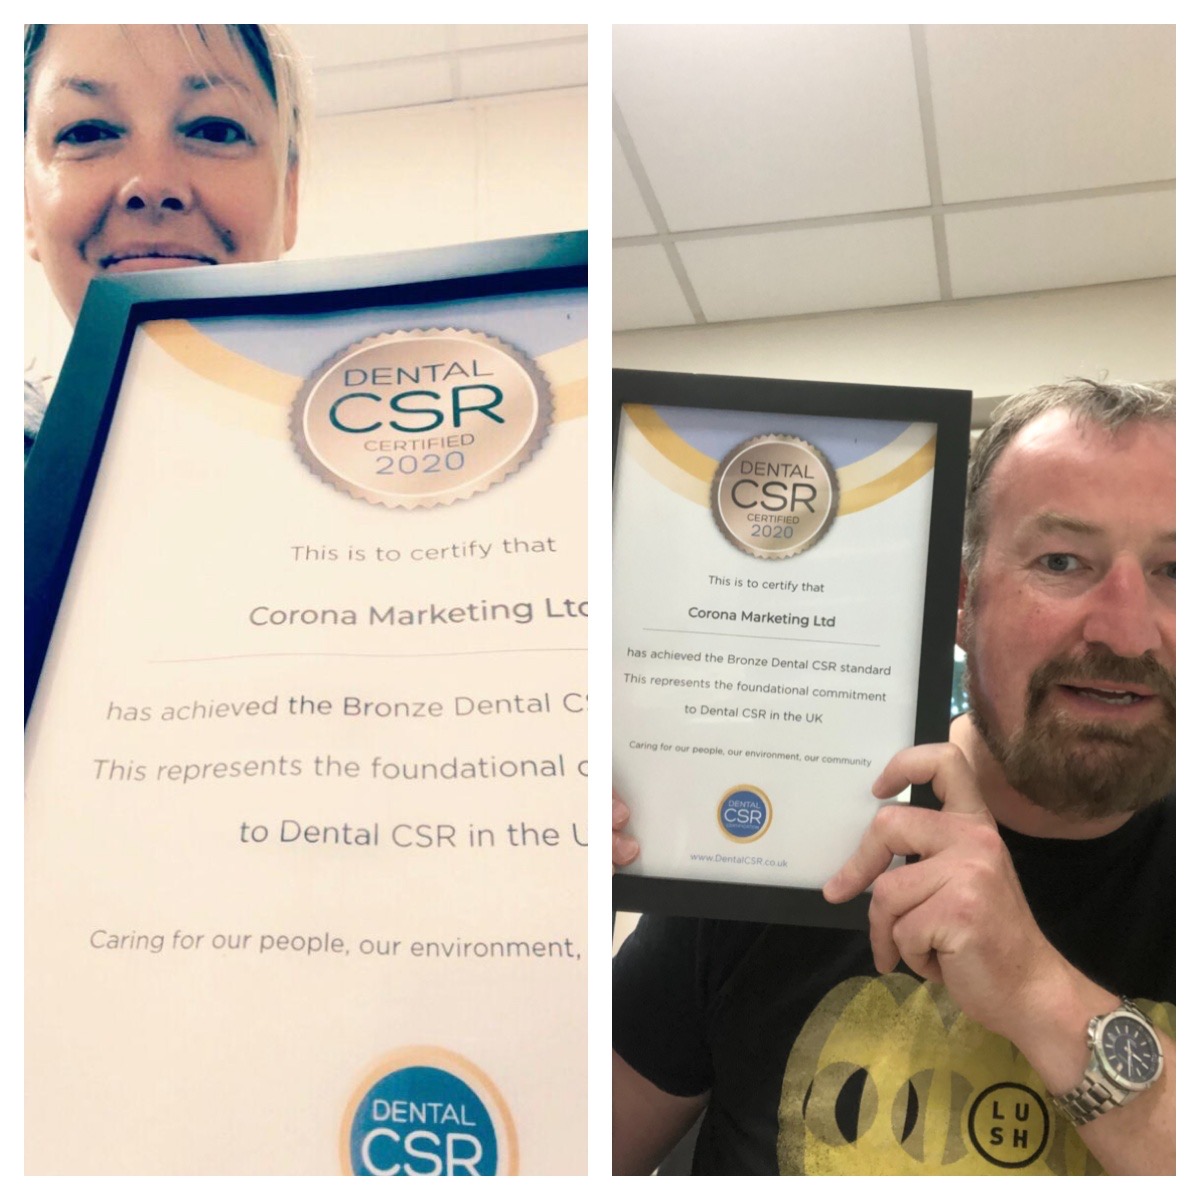 Staff at Corona Marketing hold their CSR certificate